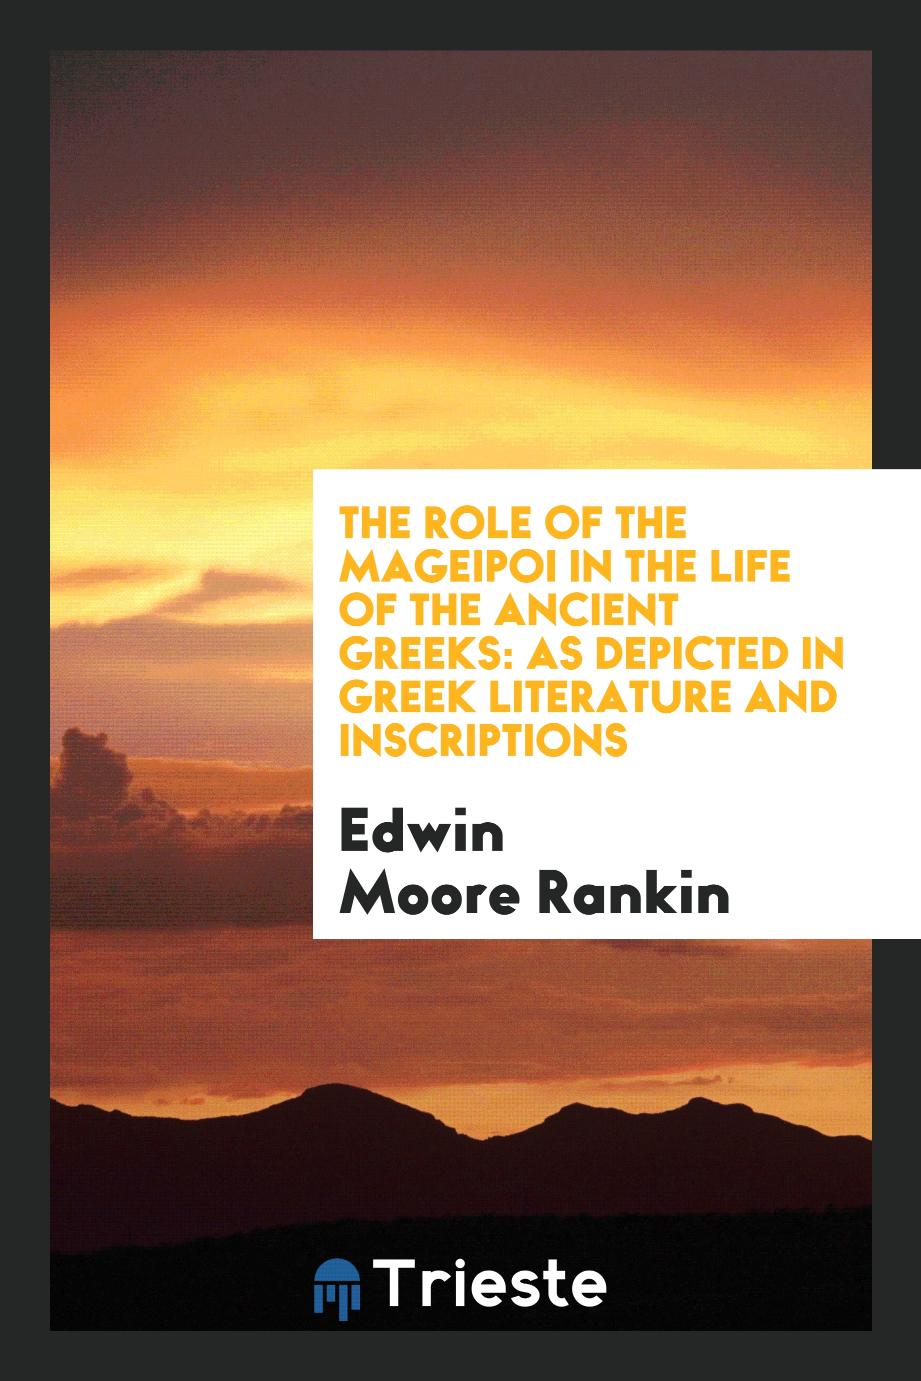 The Role of the Mageipoi in the Life of the Ancient Greeks: As Depicted in Greek Literature and Inscriptions